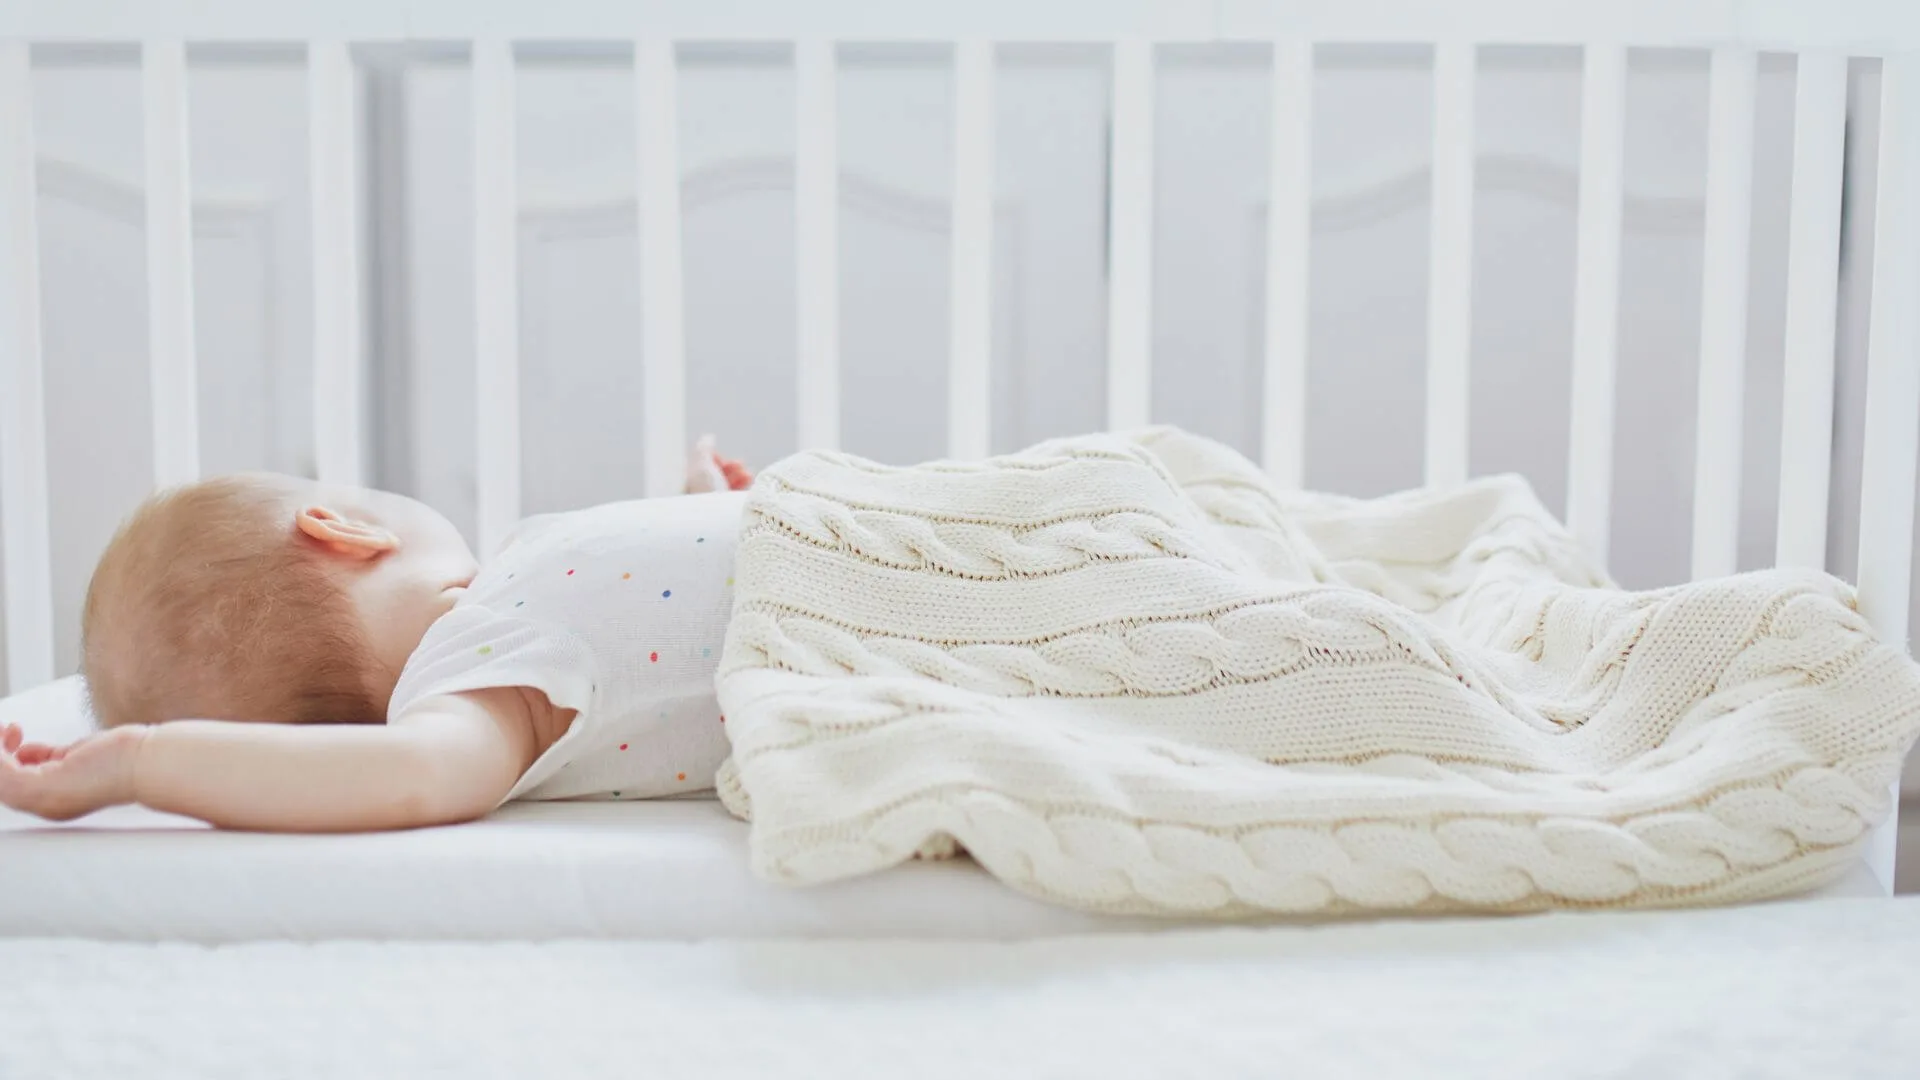 The Advantage of Co-Sleeping with Baby